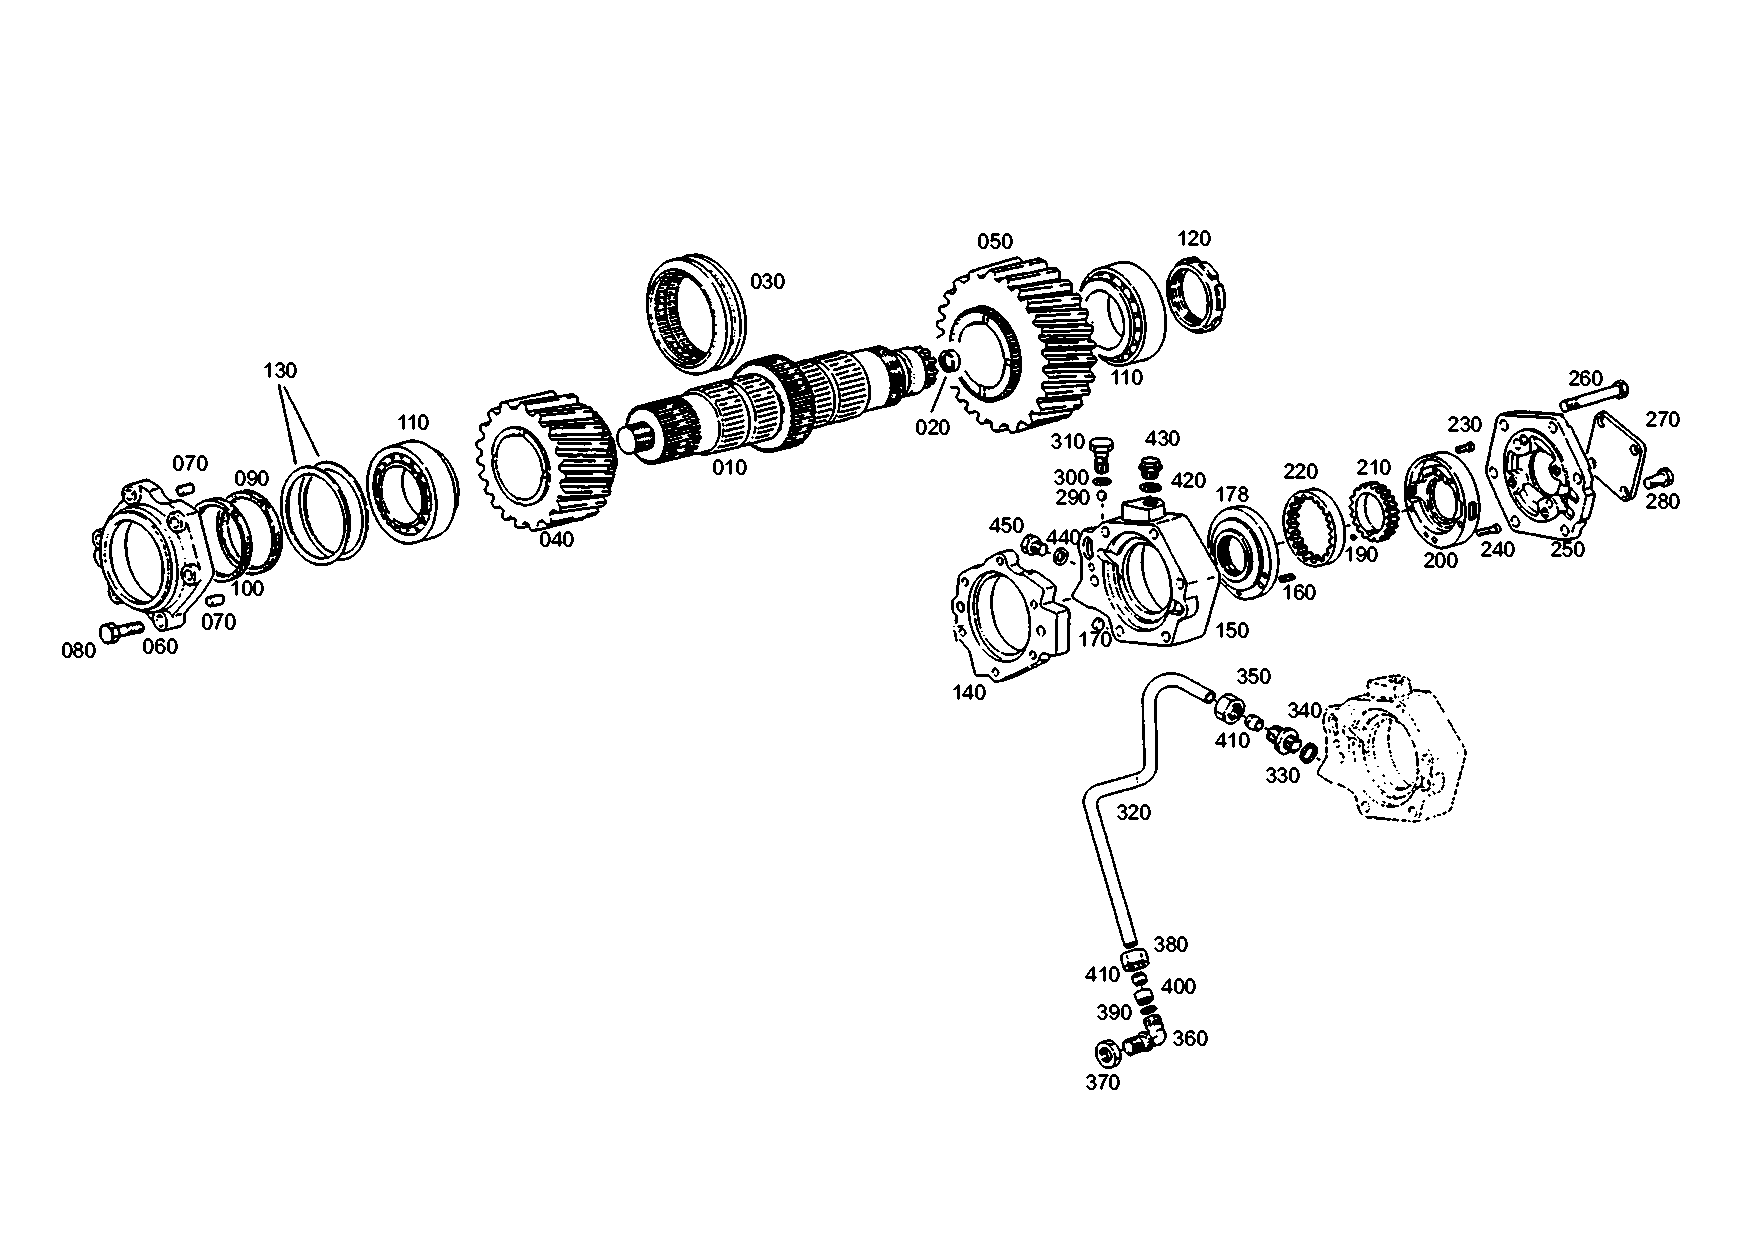 drawing for LUNA EQUIPOS INDUSTRIEALES, S.A. 171600220061 - INPUT GEAR (figure 4)